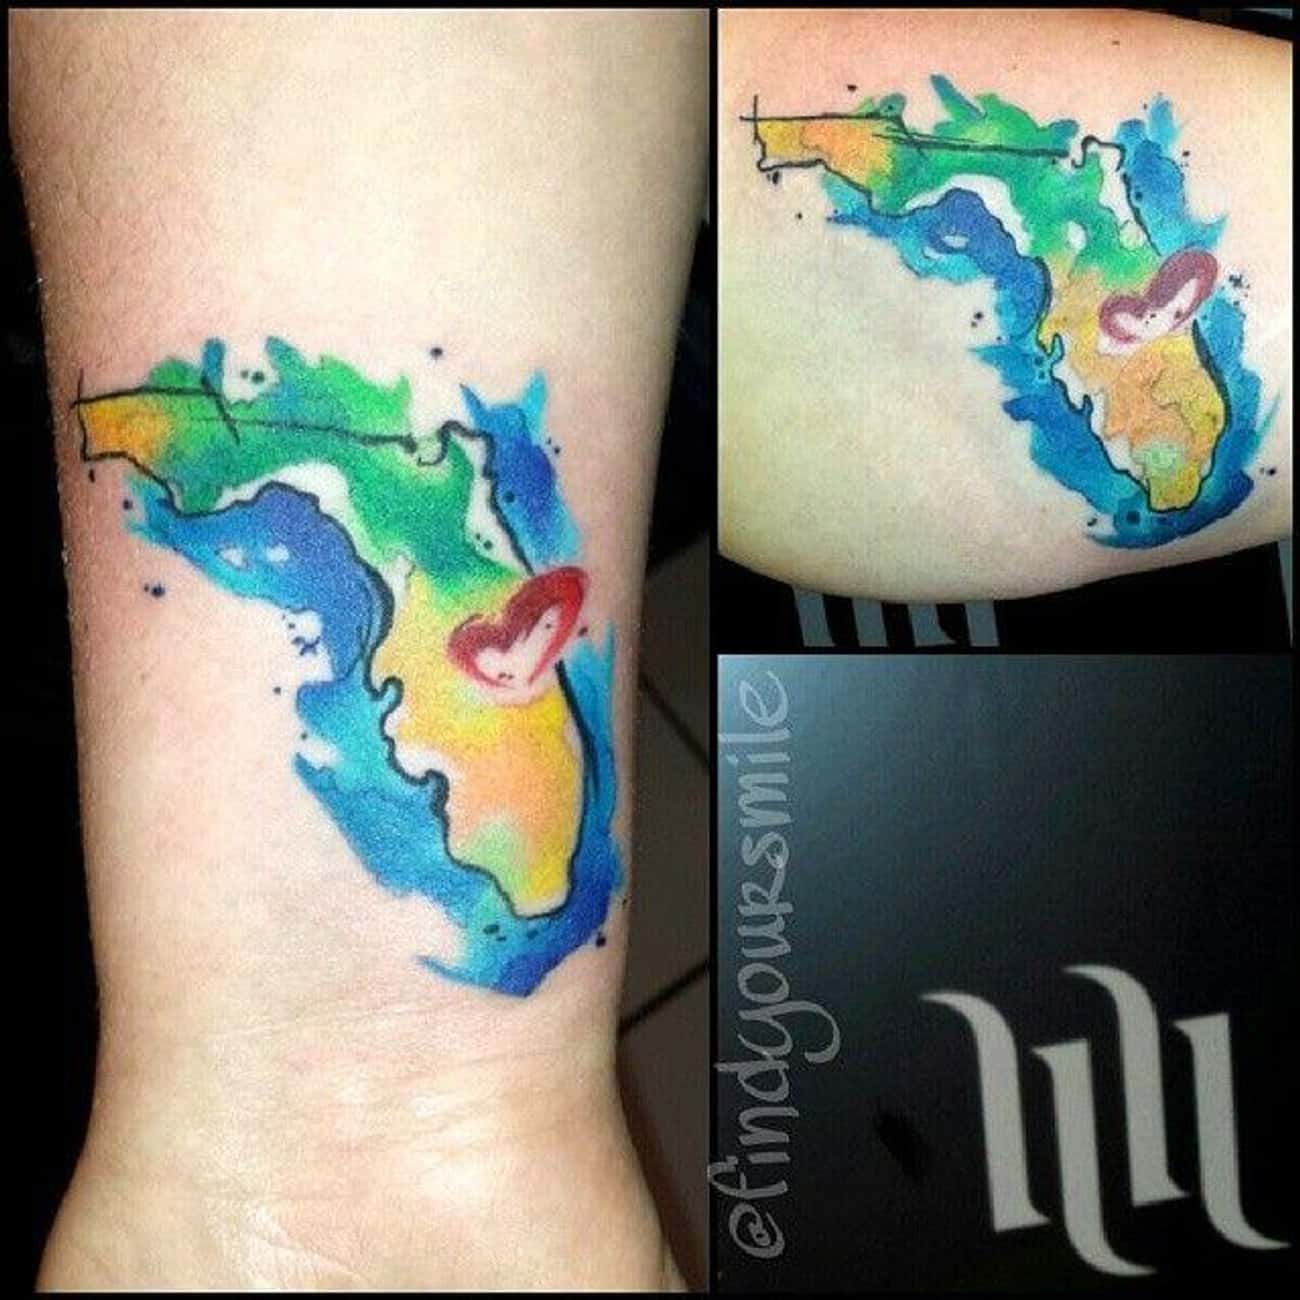 This Pretty Watercolor Style Tattoo